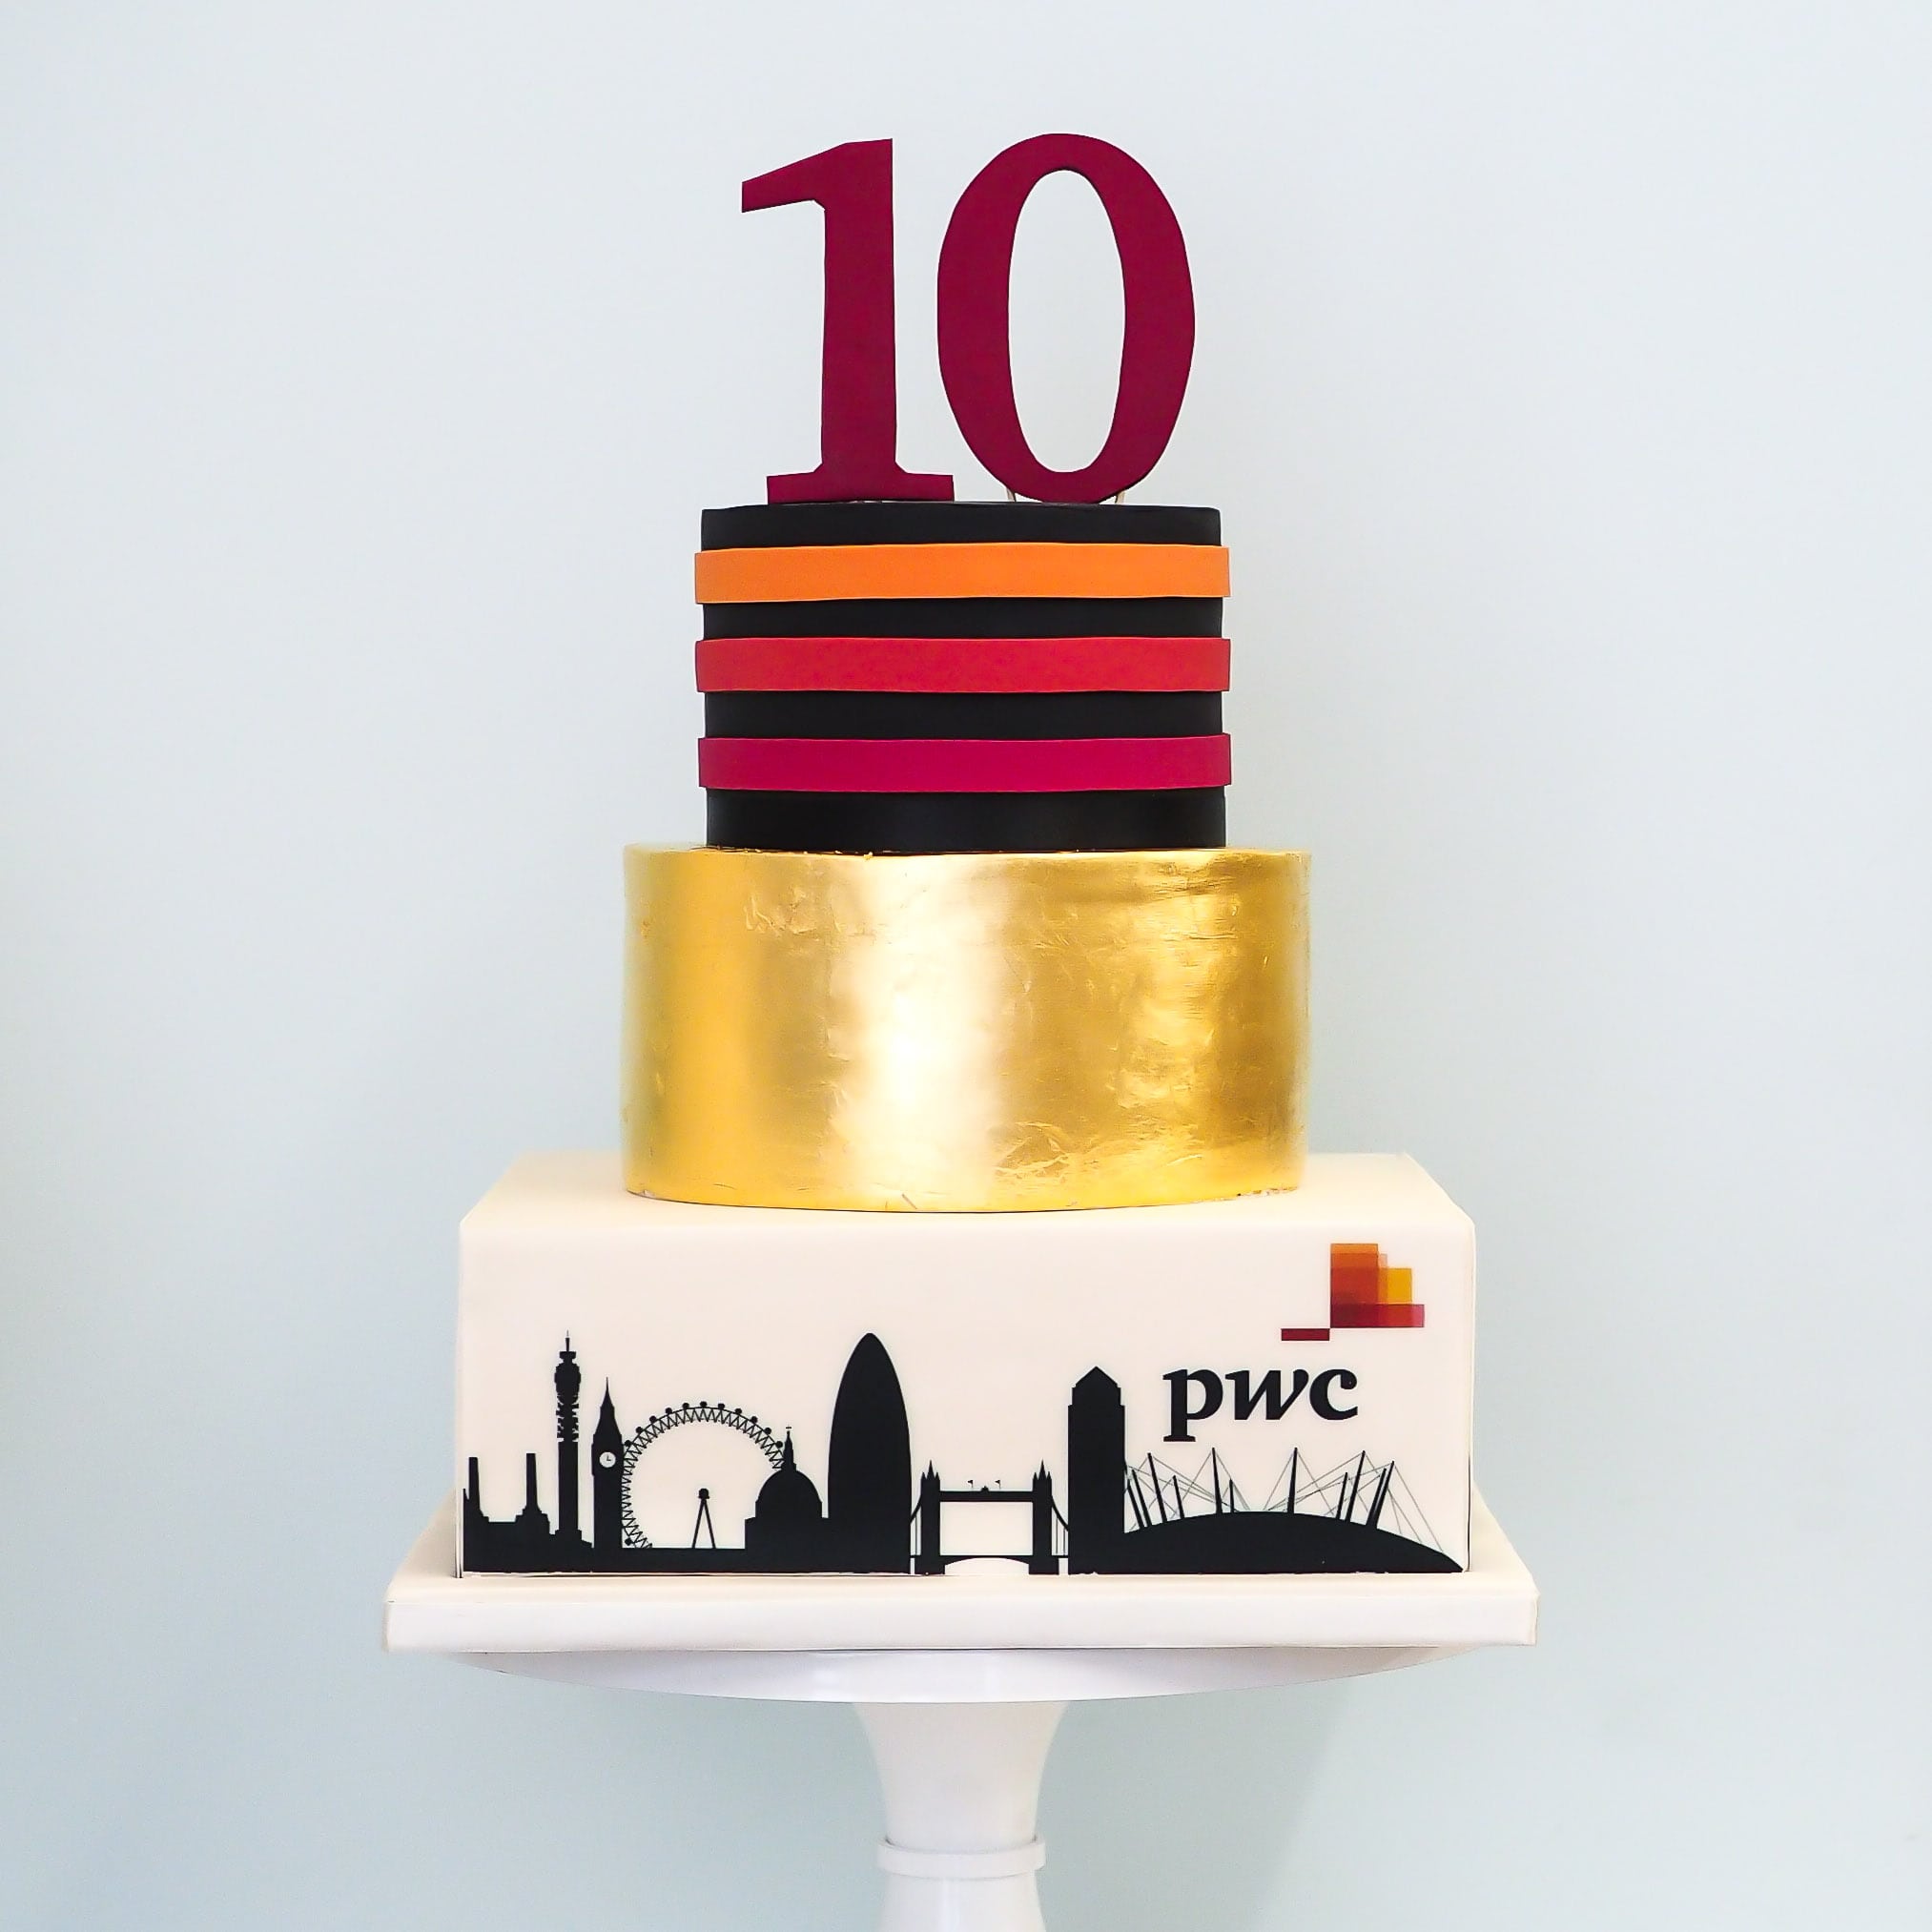 PWC corporate celebration cake for events and launches, branded